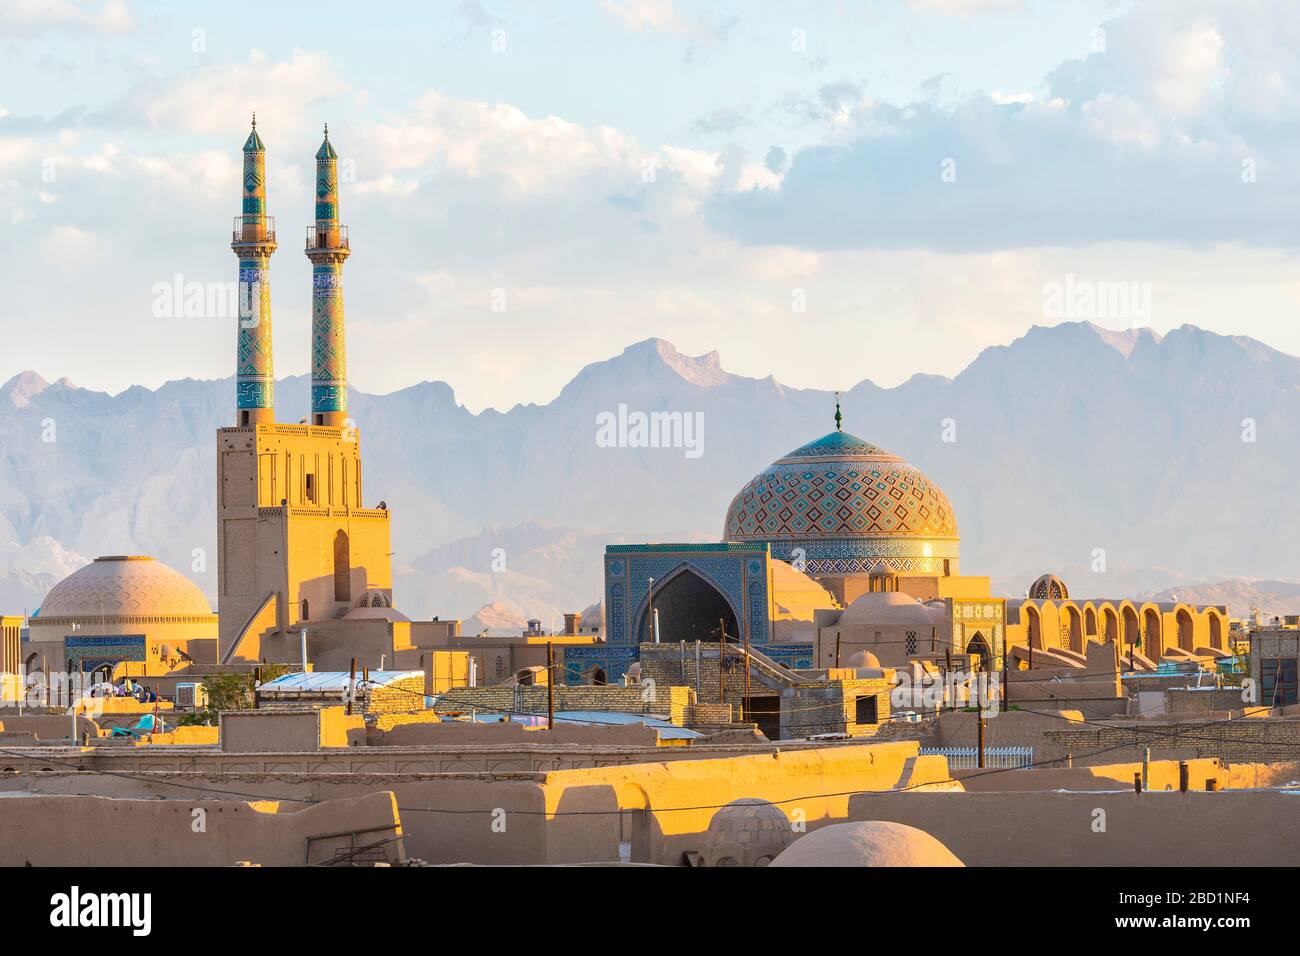 Masjid-e Jame Mosque (Friday Mosque), Yazd, Iran, Middle East Stock Photo